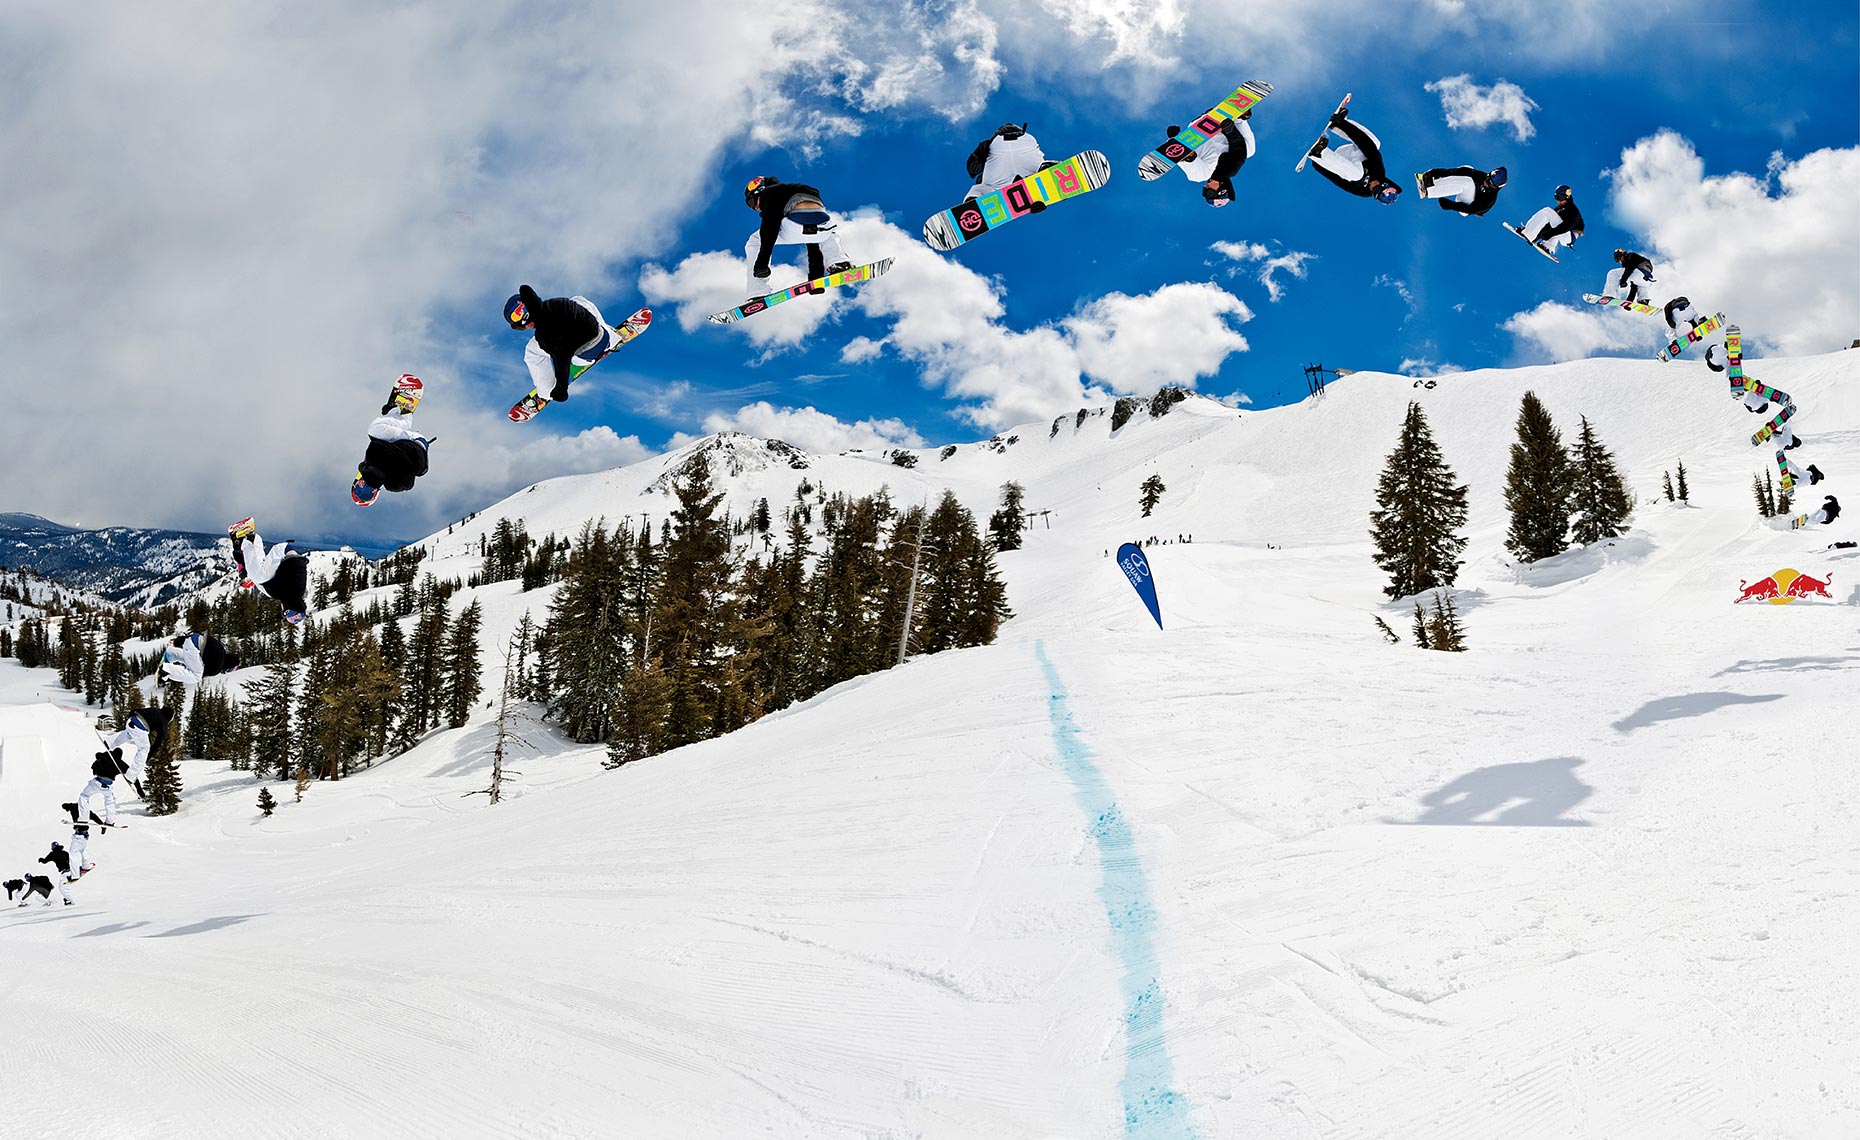 04_Seb_Toots_Triple_Cork_Squaw_Valley_California_Red_Bull_Snowboarding_Chris_Wellhausen_Photography.JPG